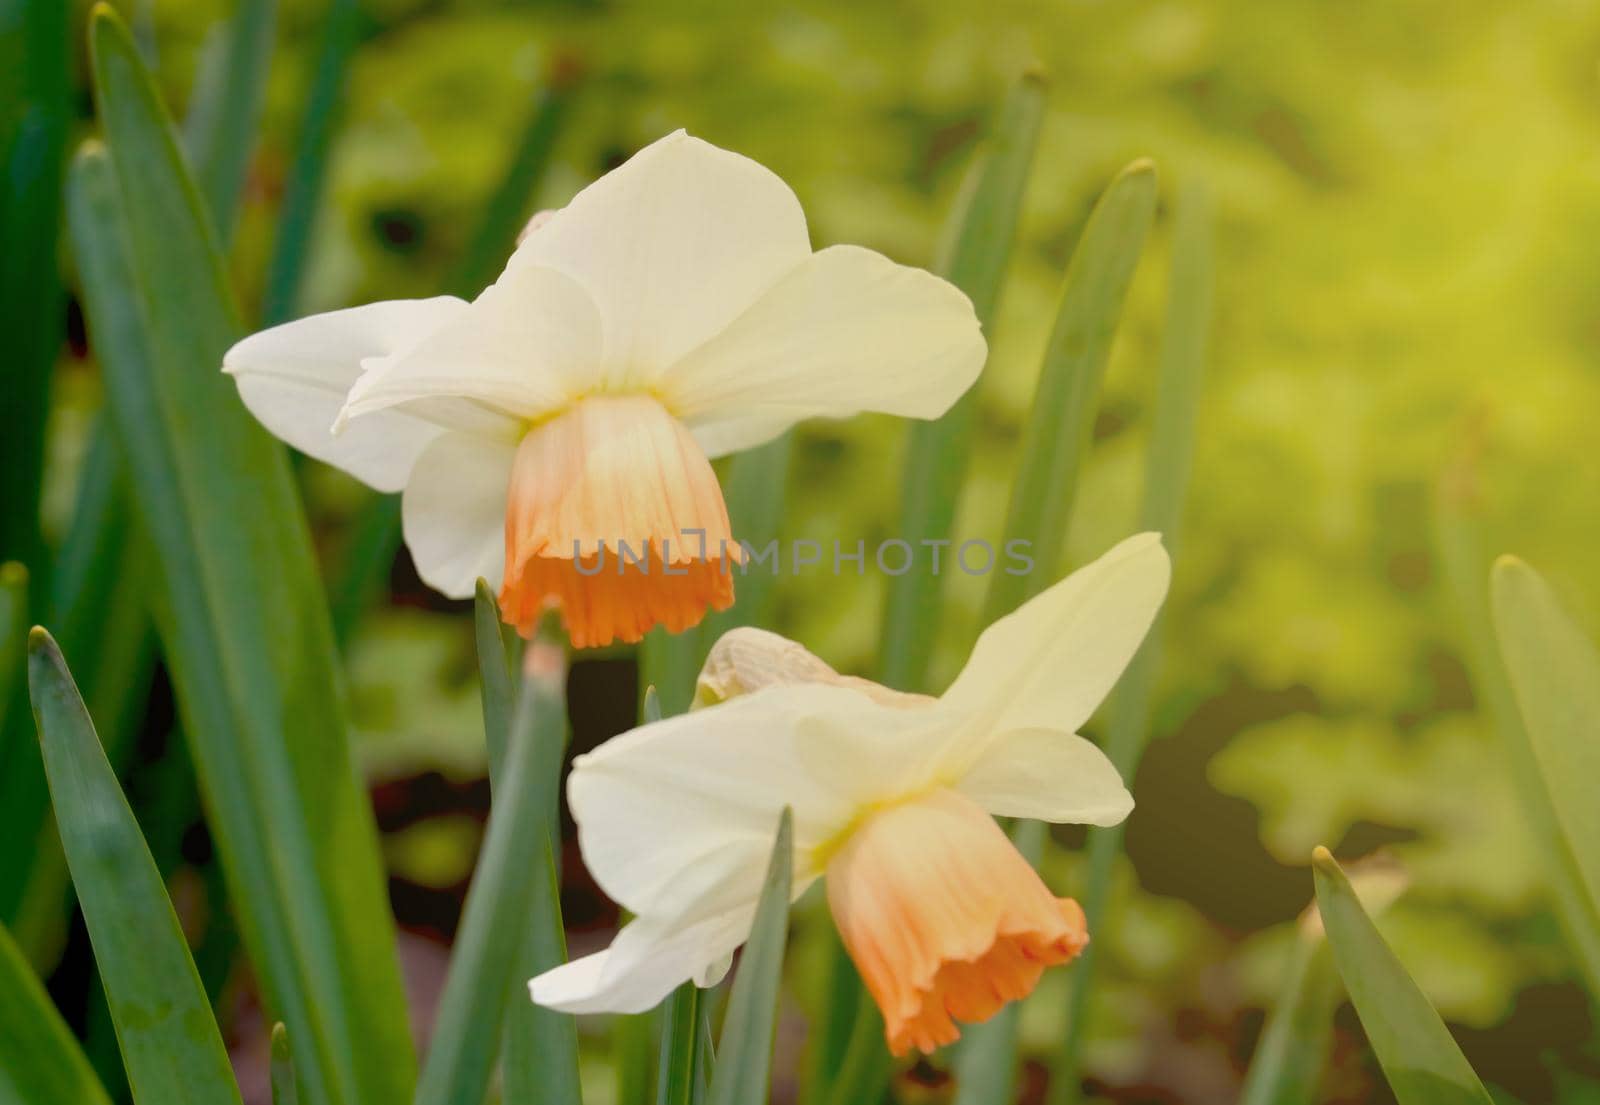 Blooming daffodils in the garden during sunset. by kip02kas